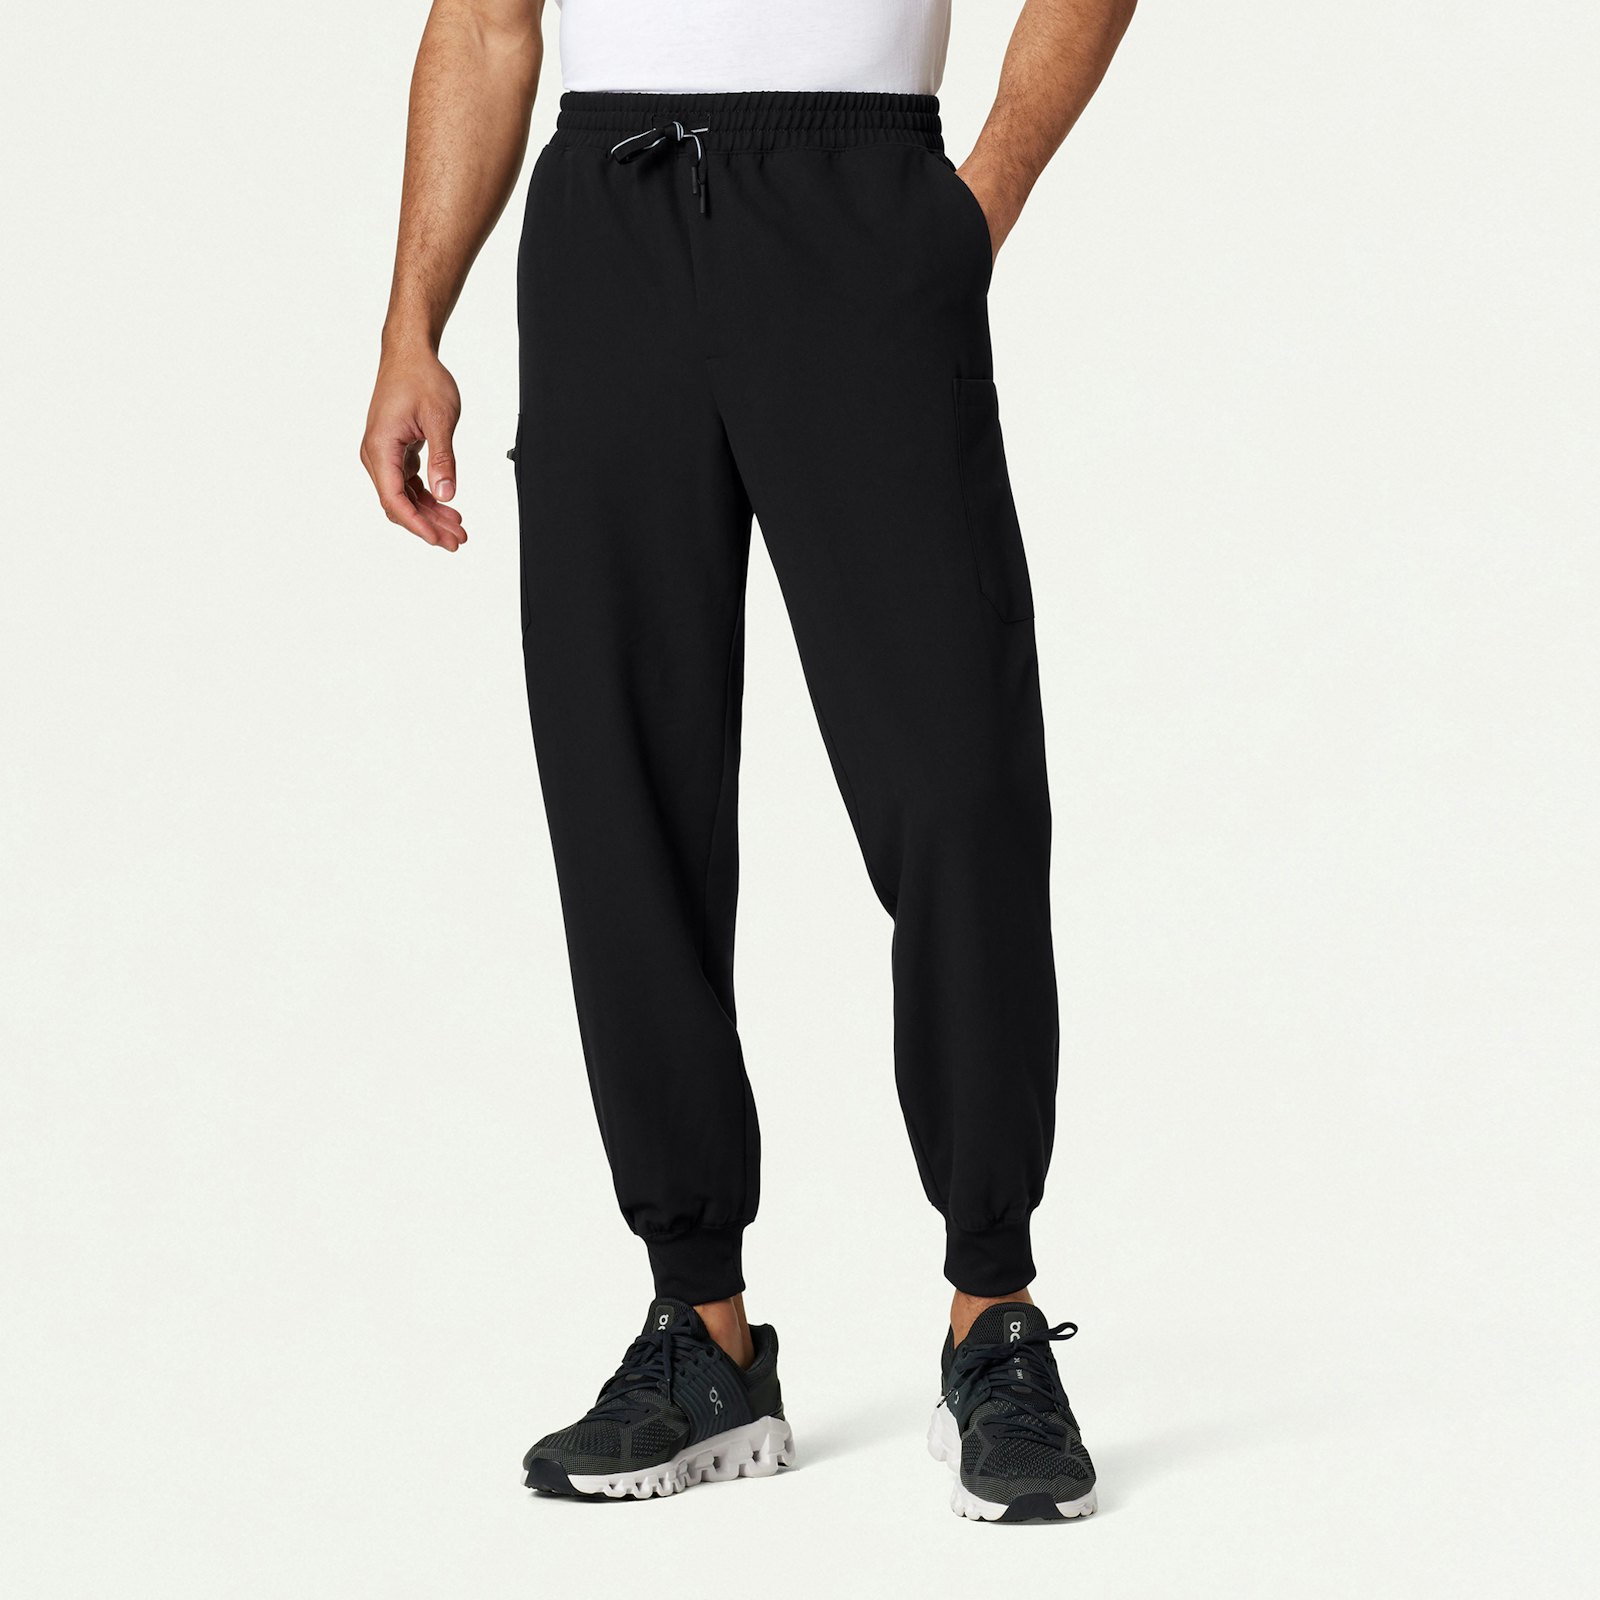 Osmo Classic Scrub Jogger in Black - Men's Pants by Jaanuu